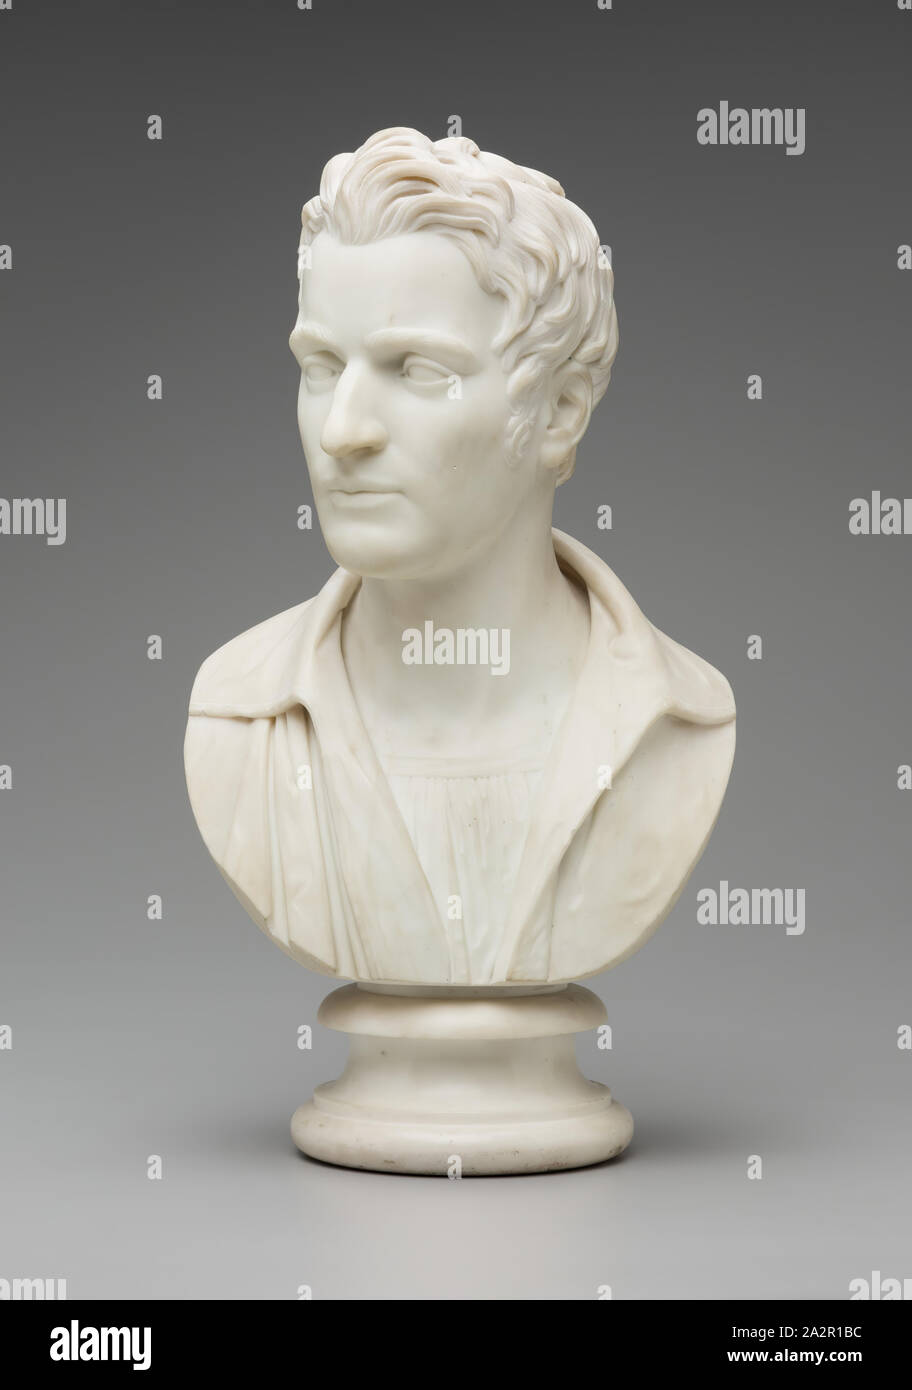 Francis Legatt Chantrey, English, 1781-1842, Honorable Mr. Mackenzie of Seaforth, 1818, marble, Overall: 23 1/2 × 13 × 8 1/2 inches (59.7 × 33 × 21.6 cm Stock Photo